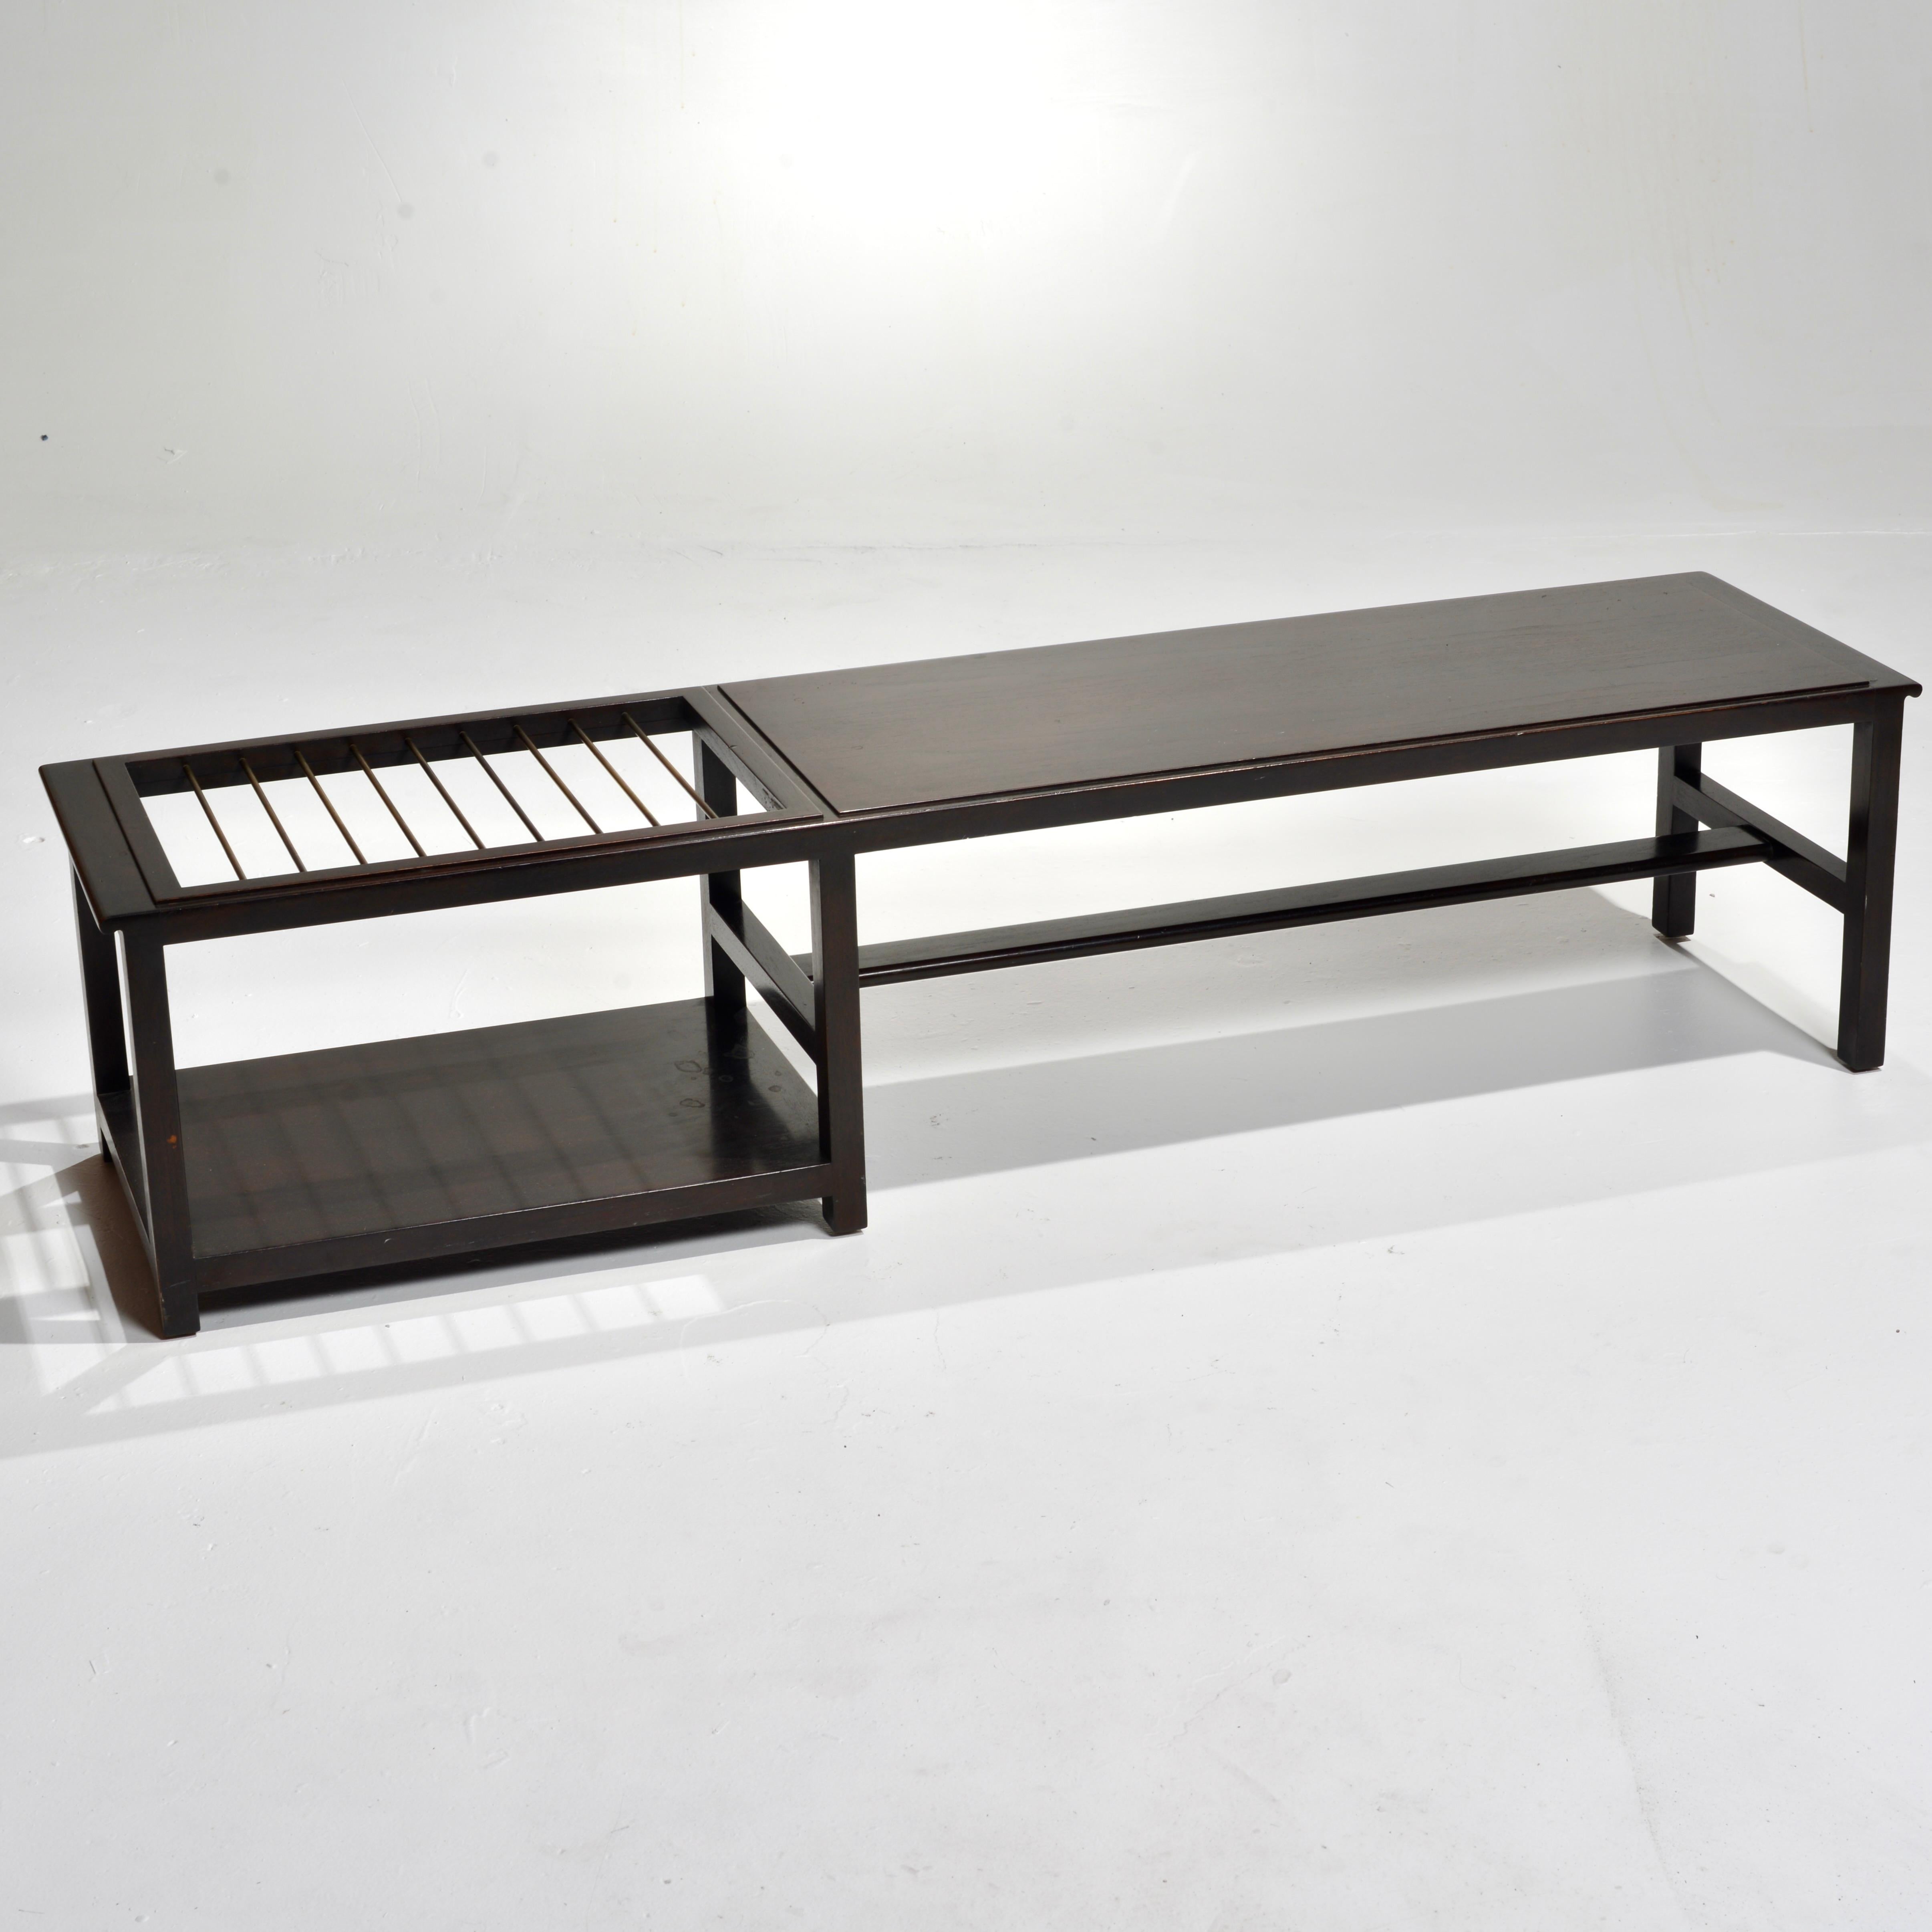 Dunbar coffee table or bench (Model 5933a) with built-in brass rods for suspending magazines. One other option is to recess a glass top over the rods to use as table surface. Signed with paper label and brass rectangular label.